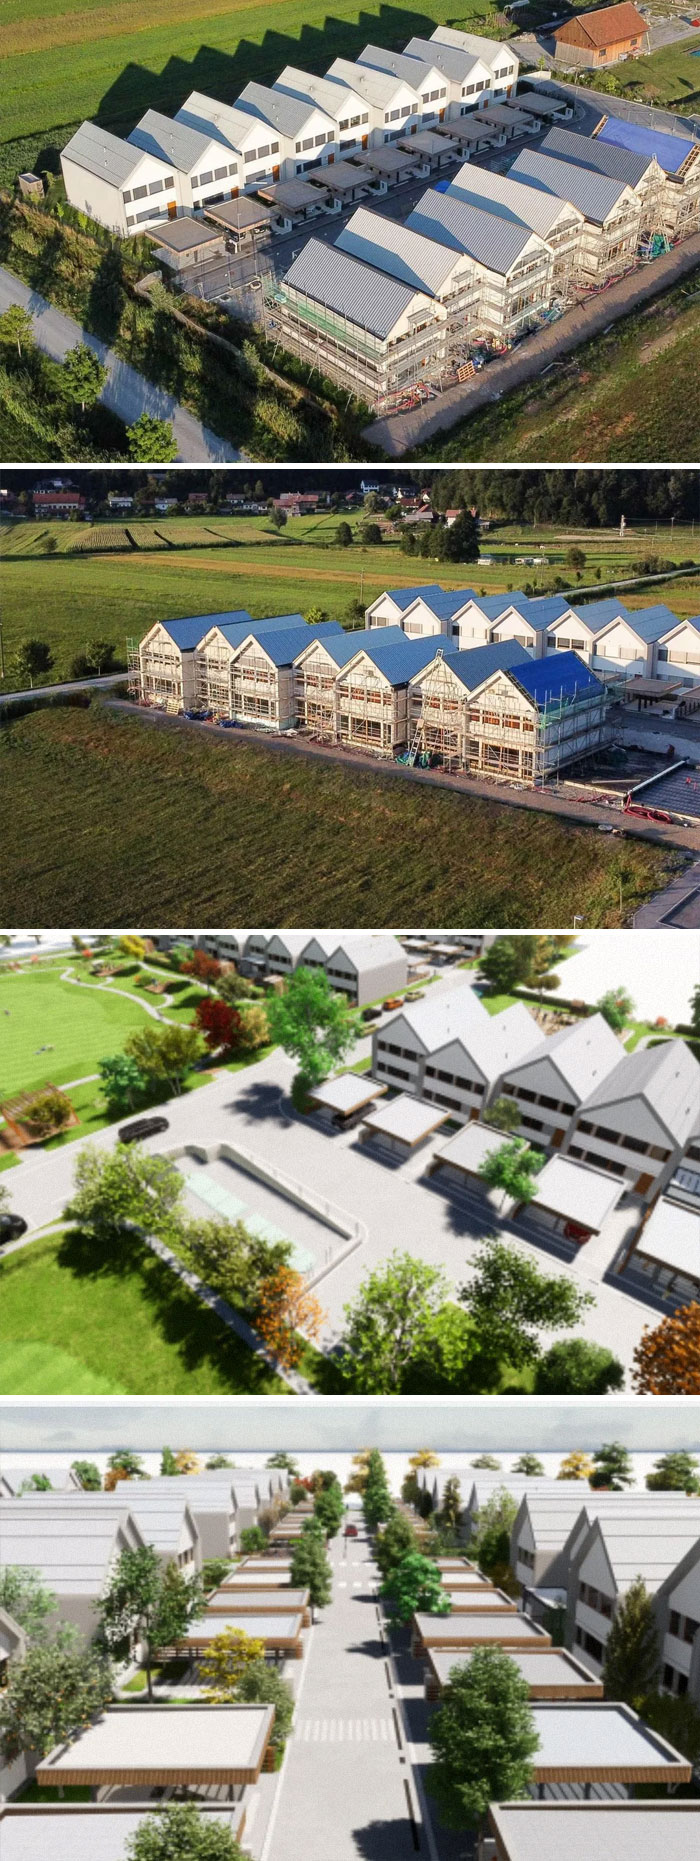 I Swear My Country Has Some Of The Worst Real Estate Projects. These Are Single Family Homes In The Middle Of A Rural Area. The Last Two Pics Are From Their Website, They Plan To Add 6 More Rows In The Future